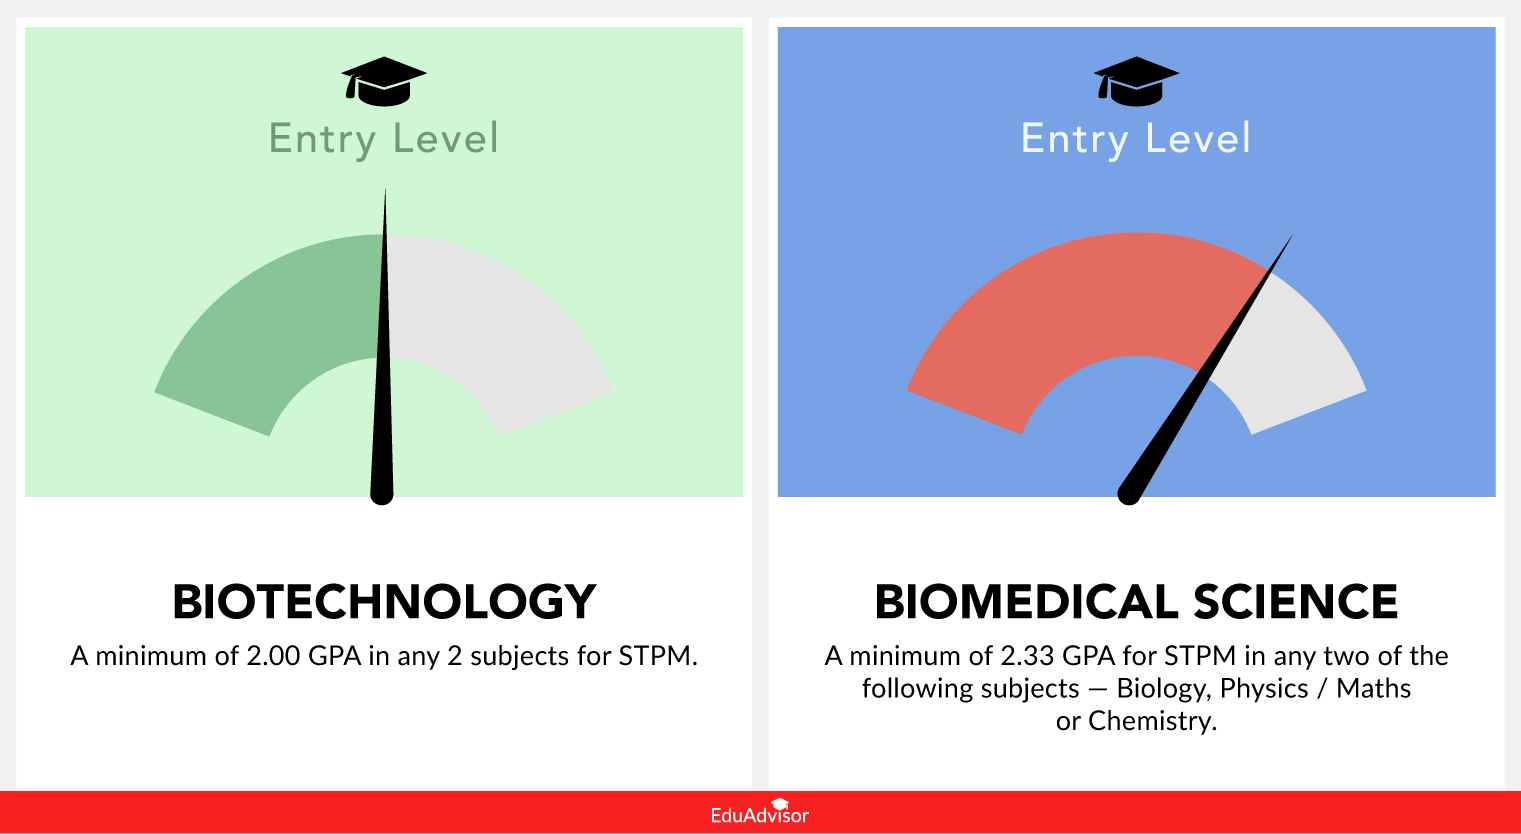 Biotechnology vs Biomedical Science What’s the Difference?